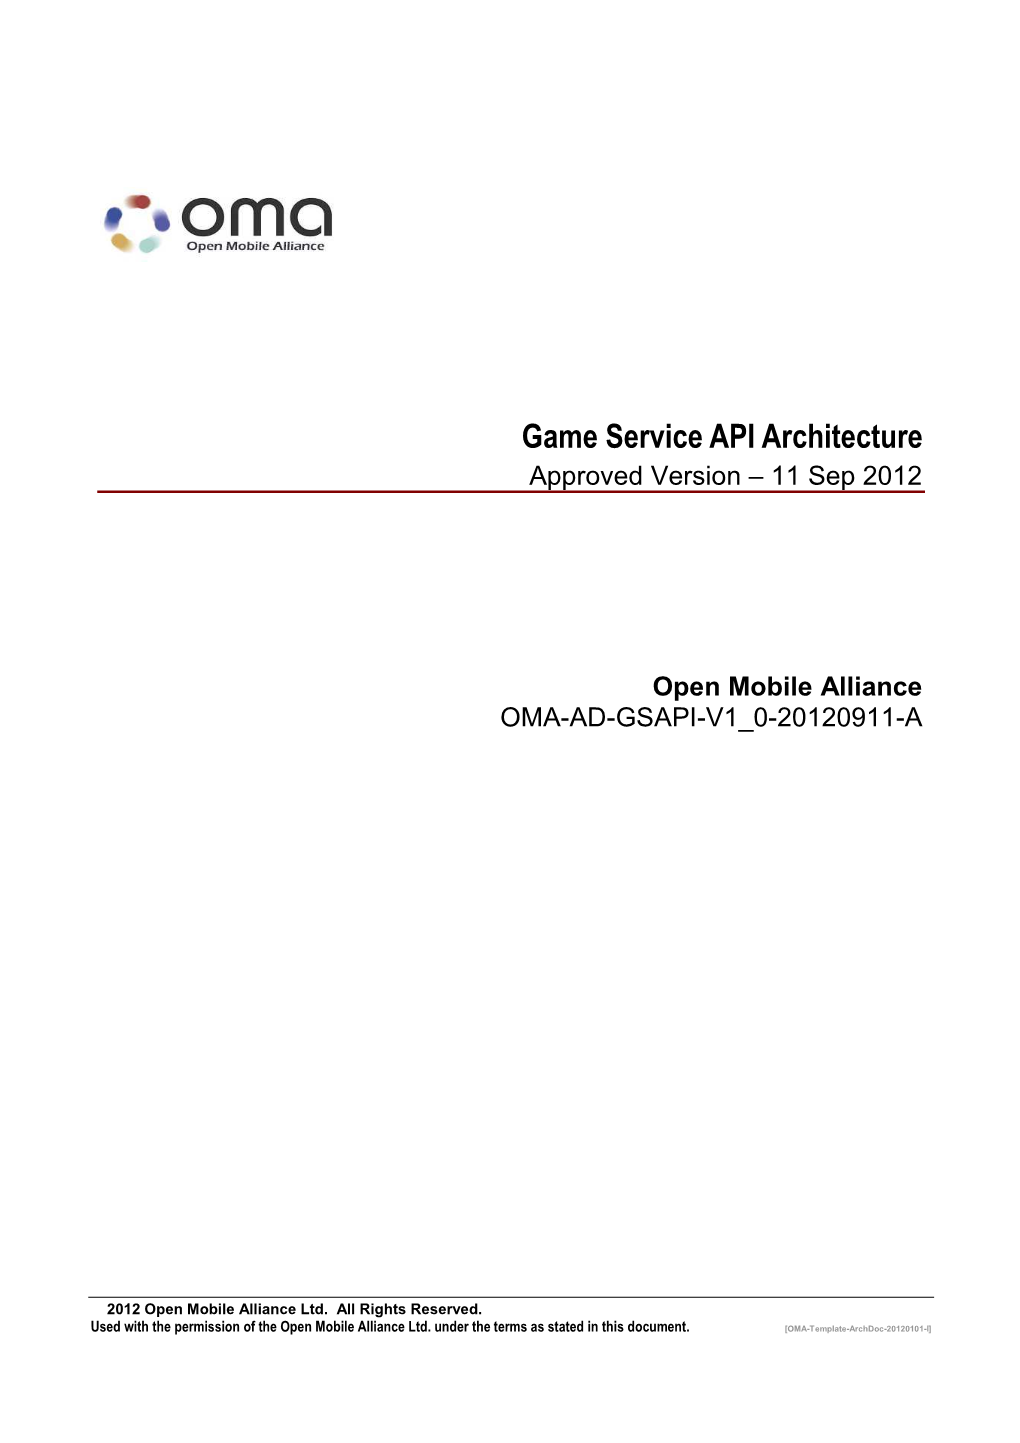 Game Service API Architecture Approved Version – 11 Sep 2012